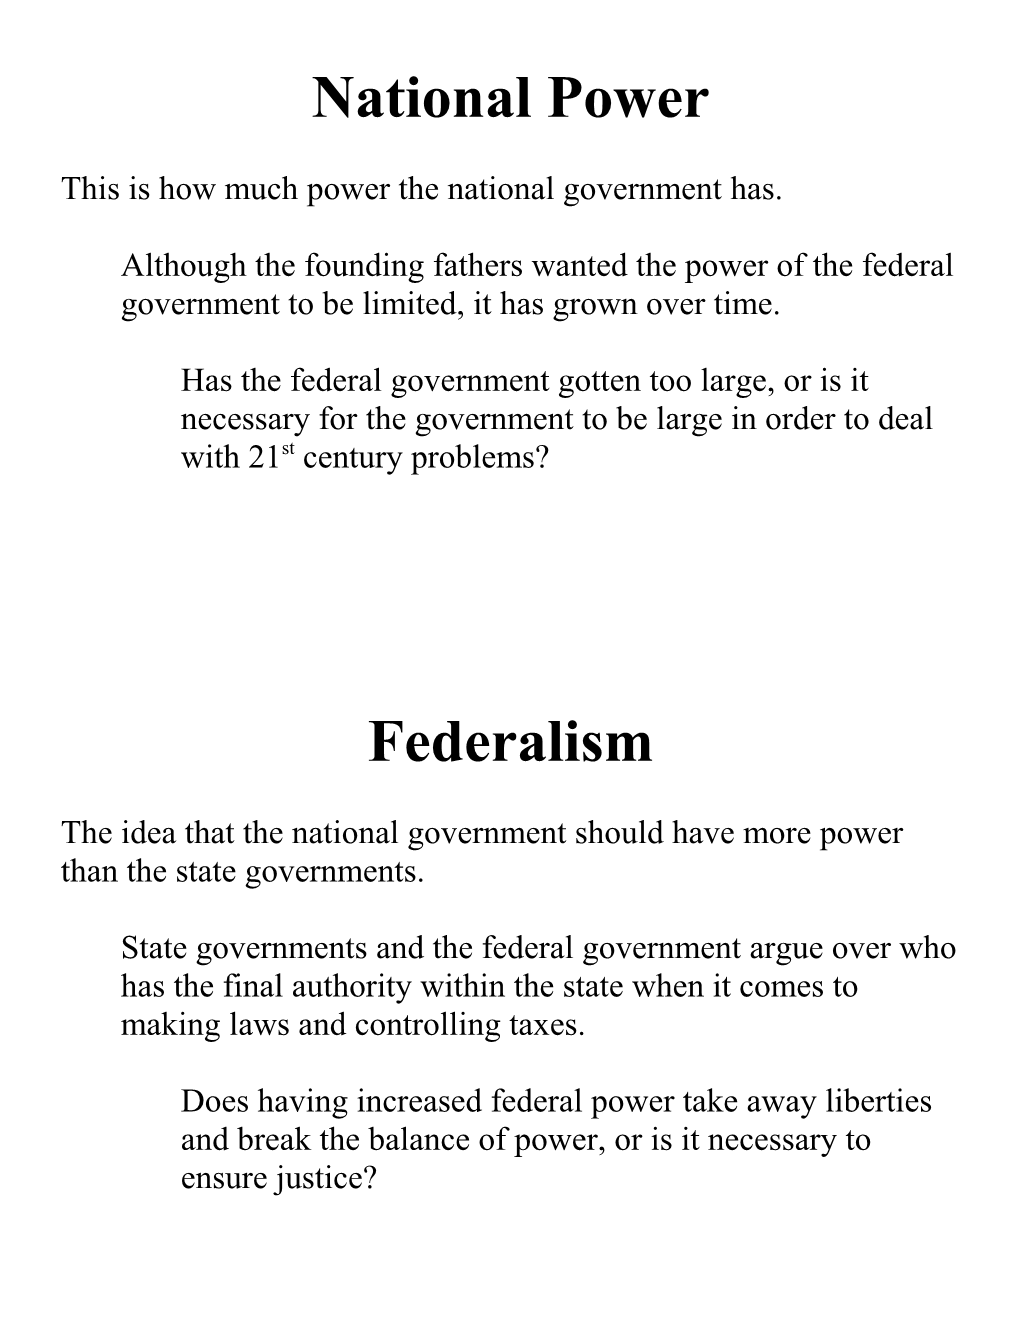 This Is How Much Power the National Government Has